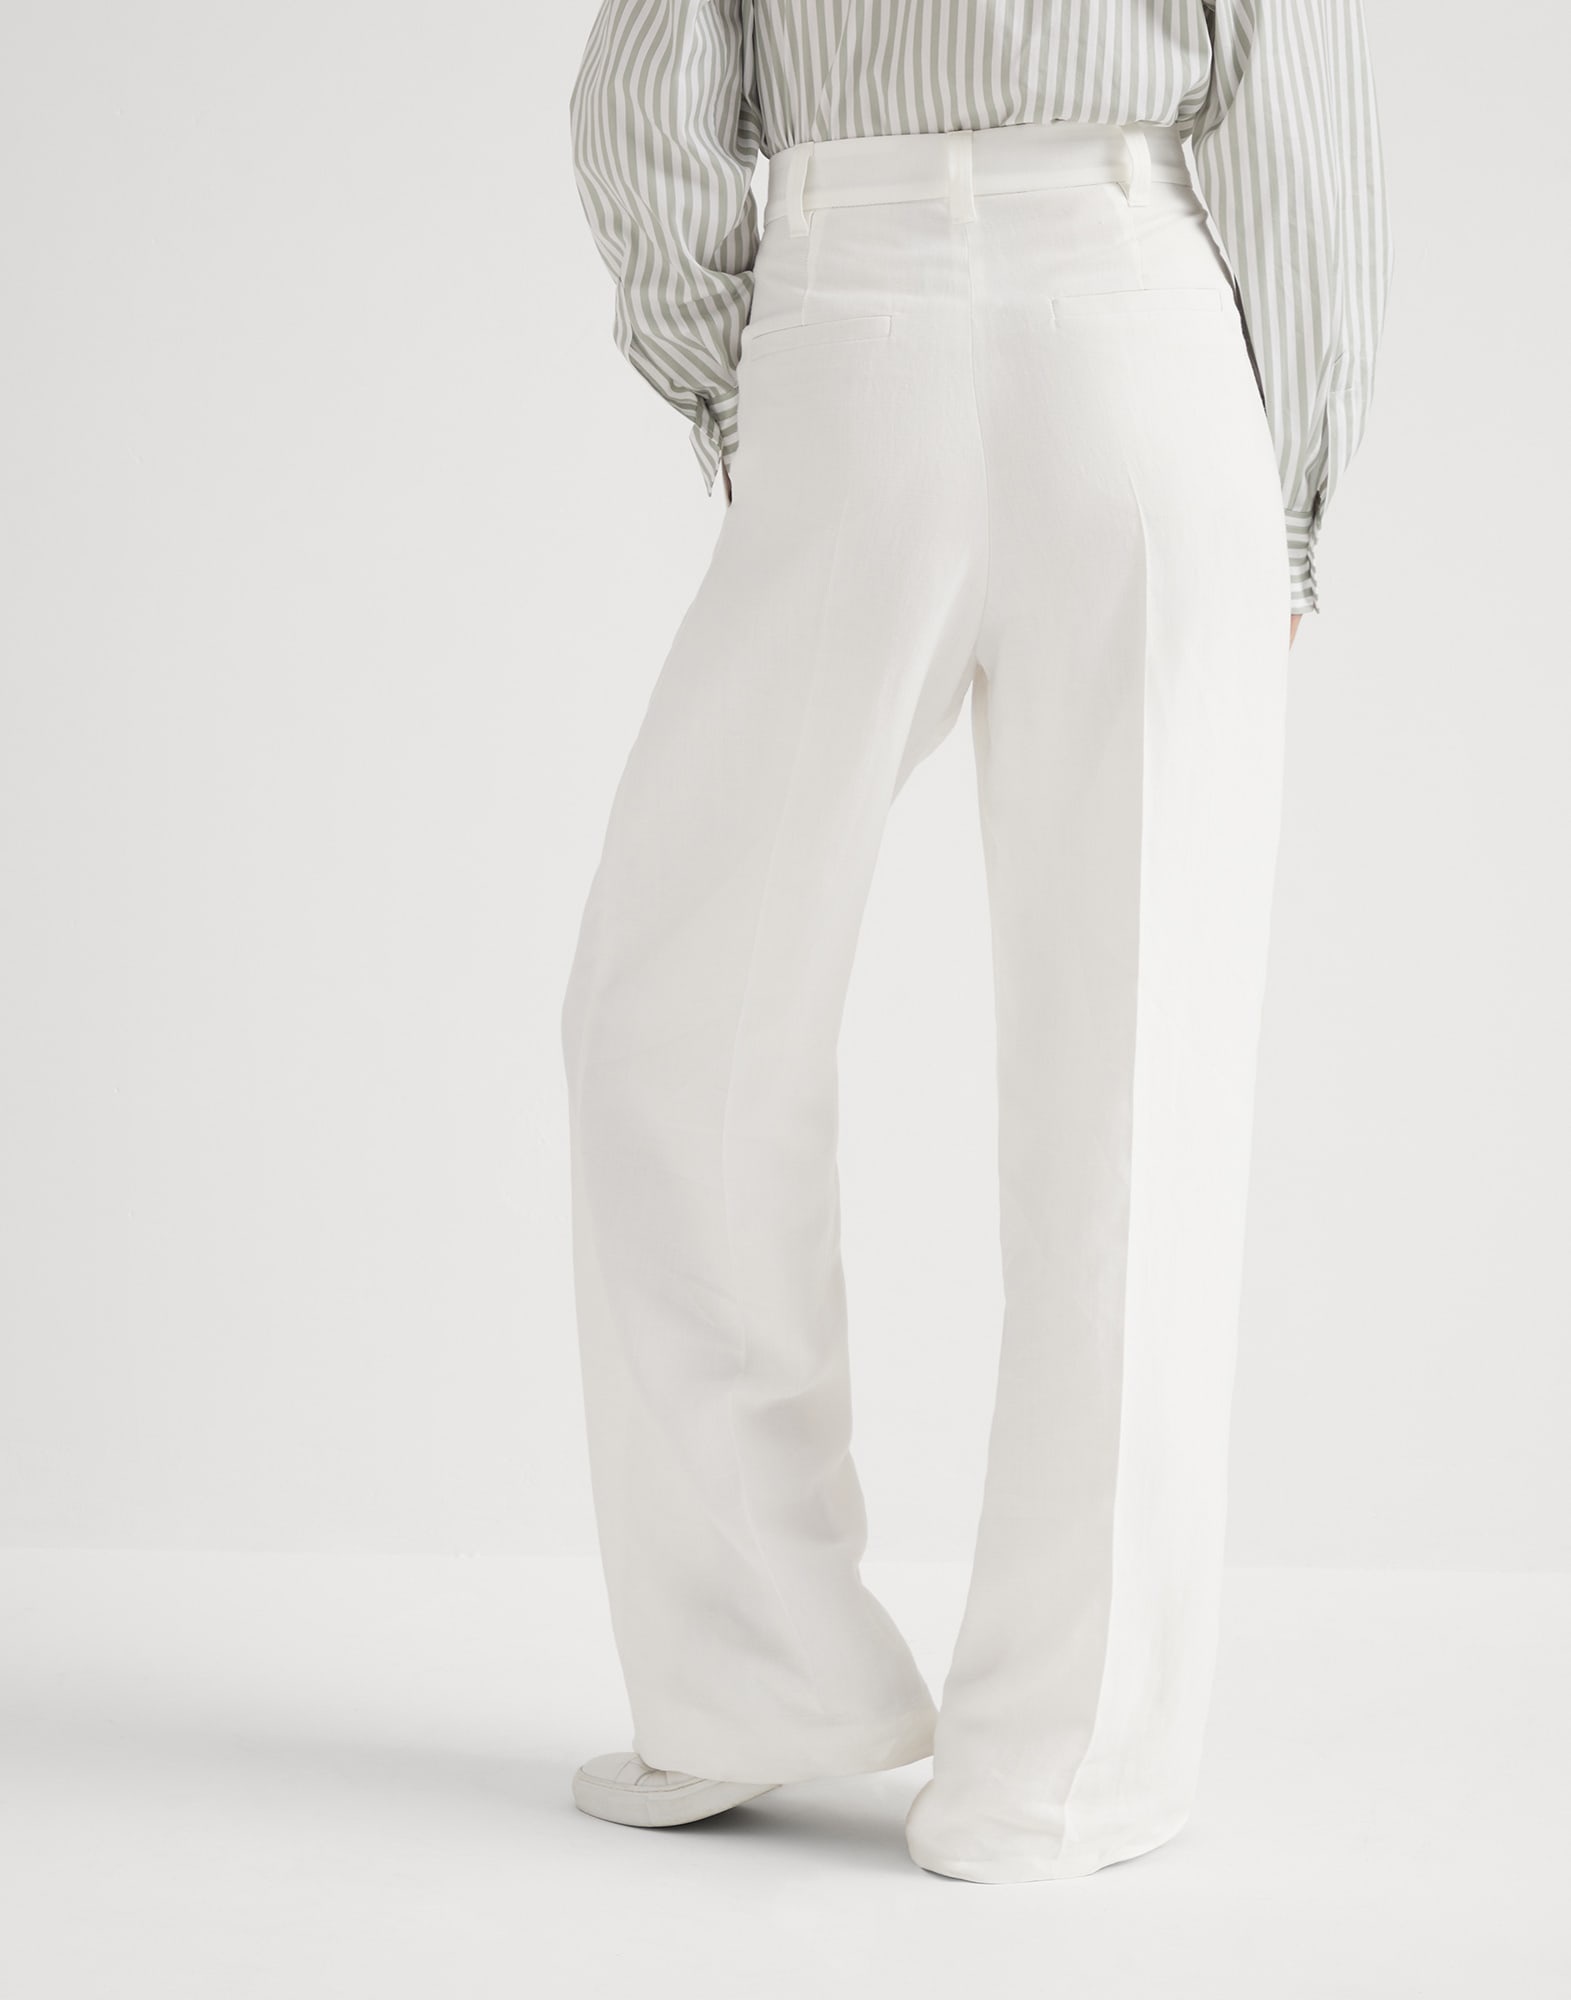 Viscose and linen fluid twill sartorial wide trousers - 2